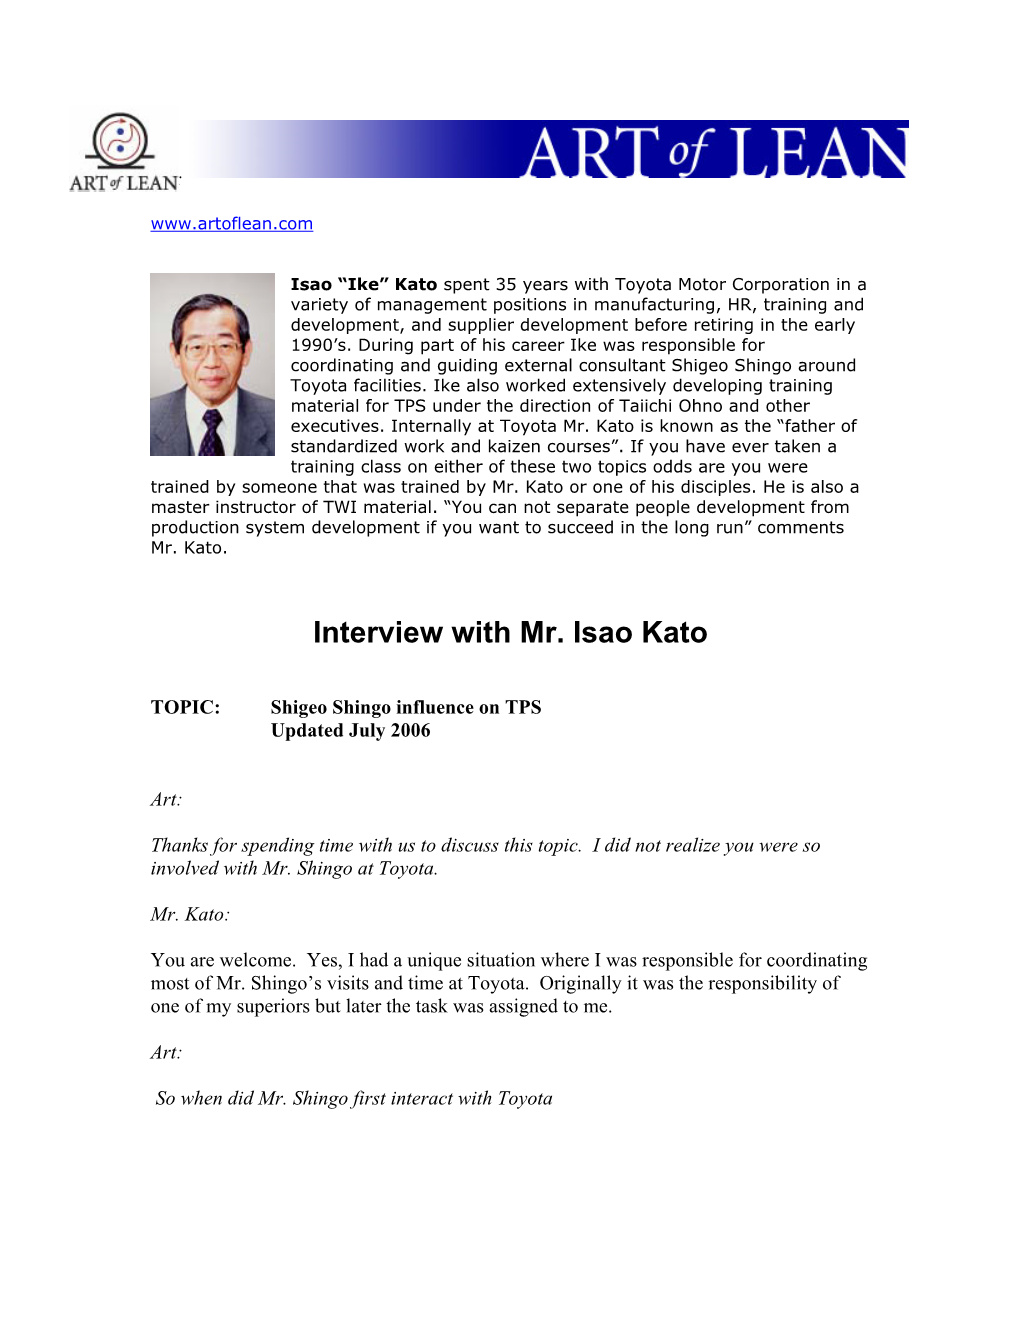 Interview with Mr. Isao Kato